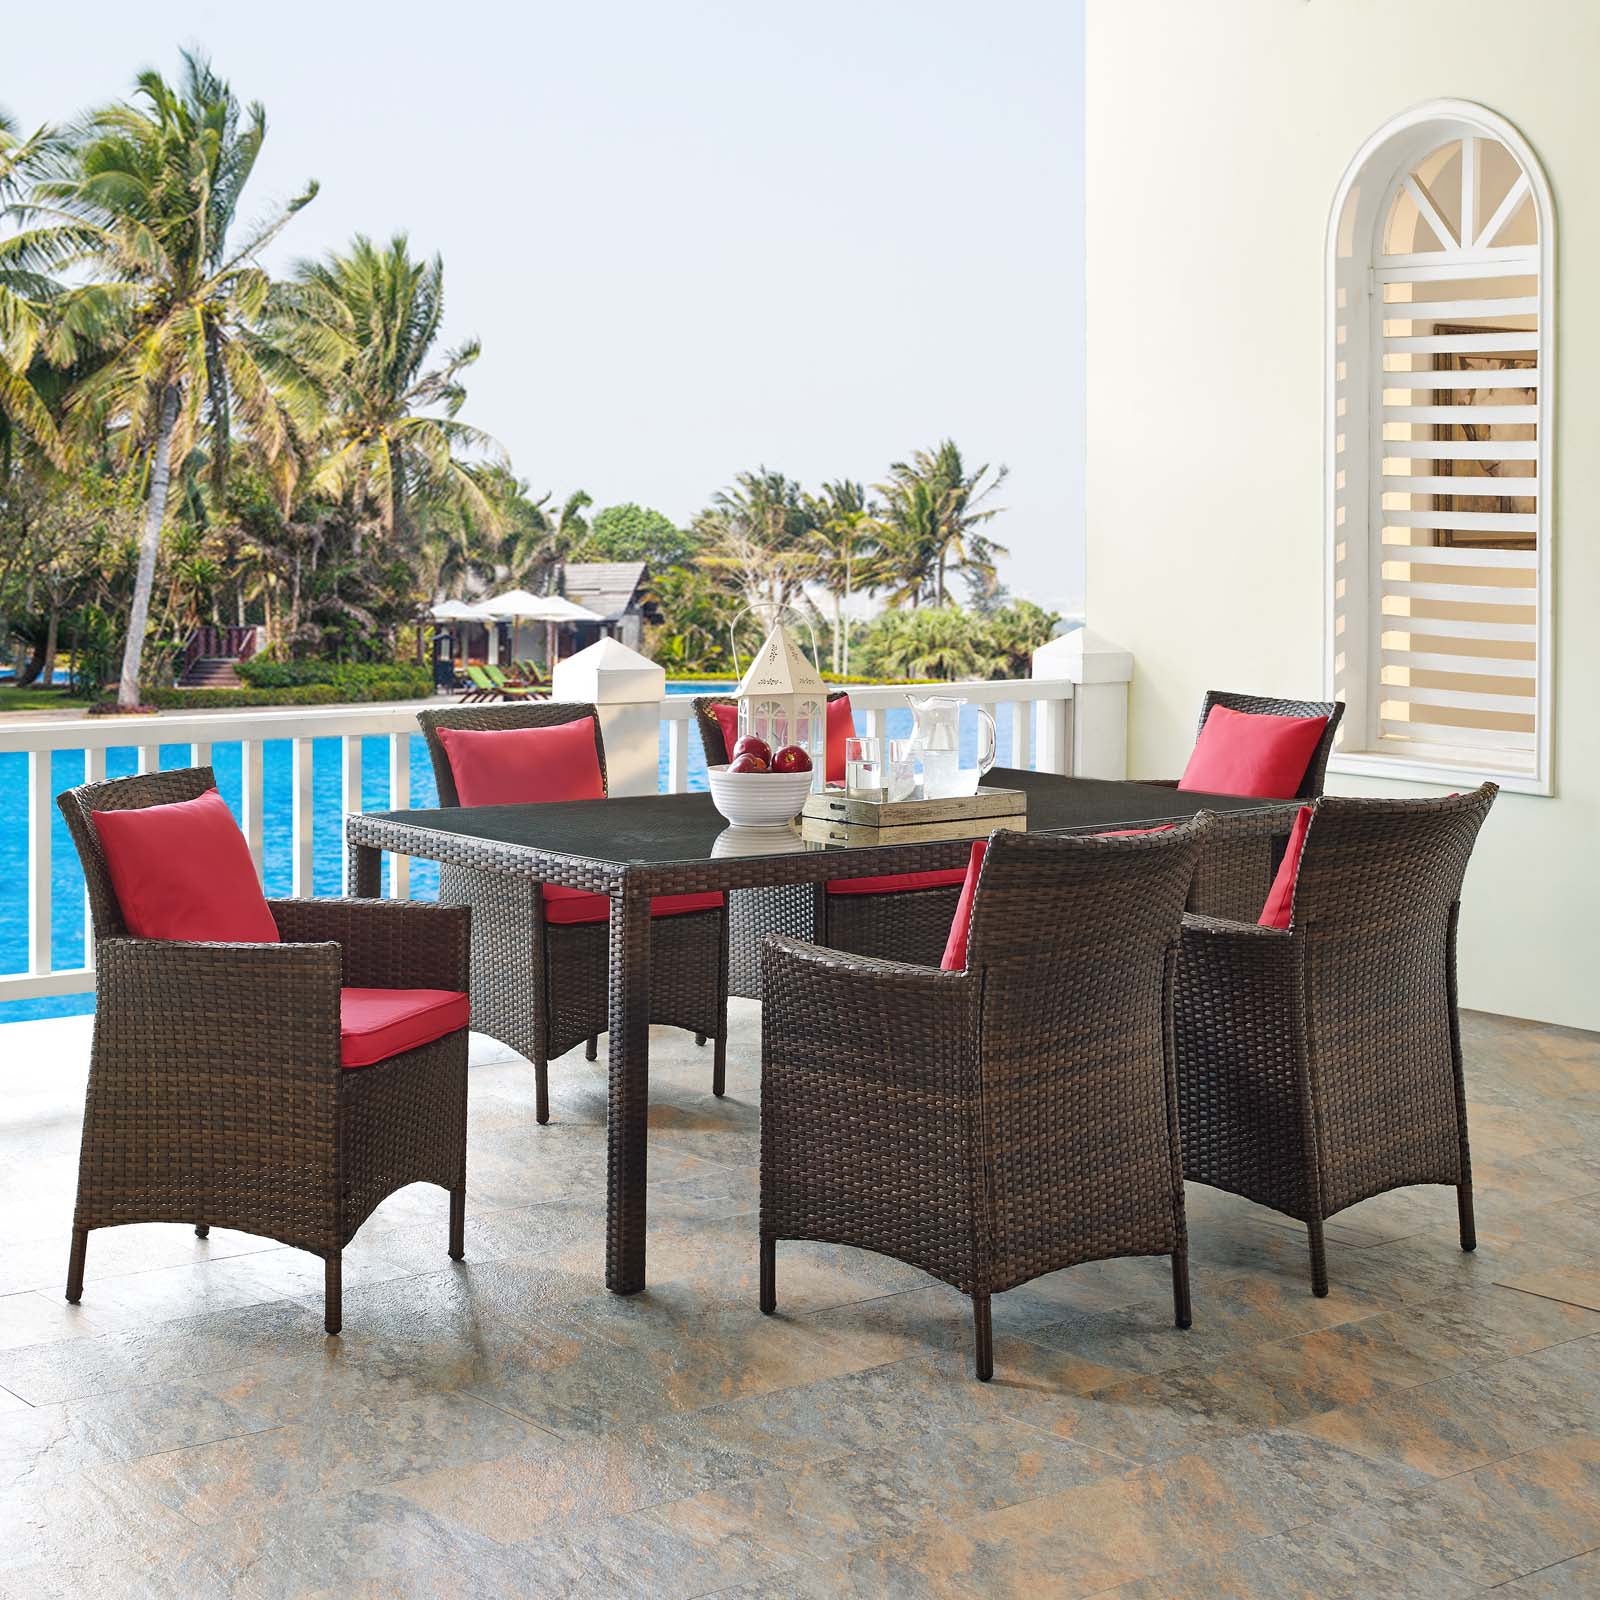 Modway Outdoor Dining Sets - Conduit 7 Piece Outdoor Patio Wicker Rattan Dining Set Brown Red